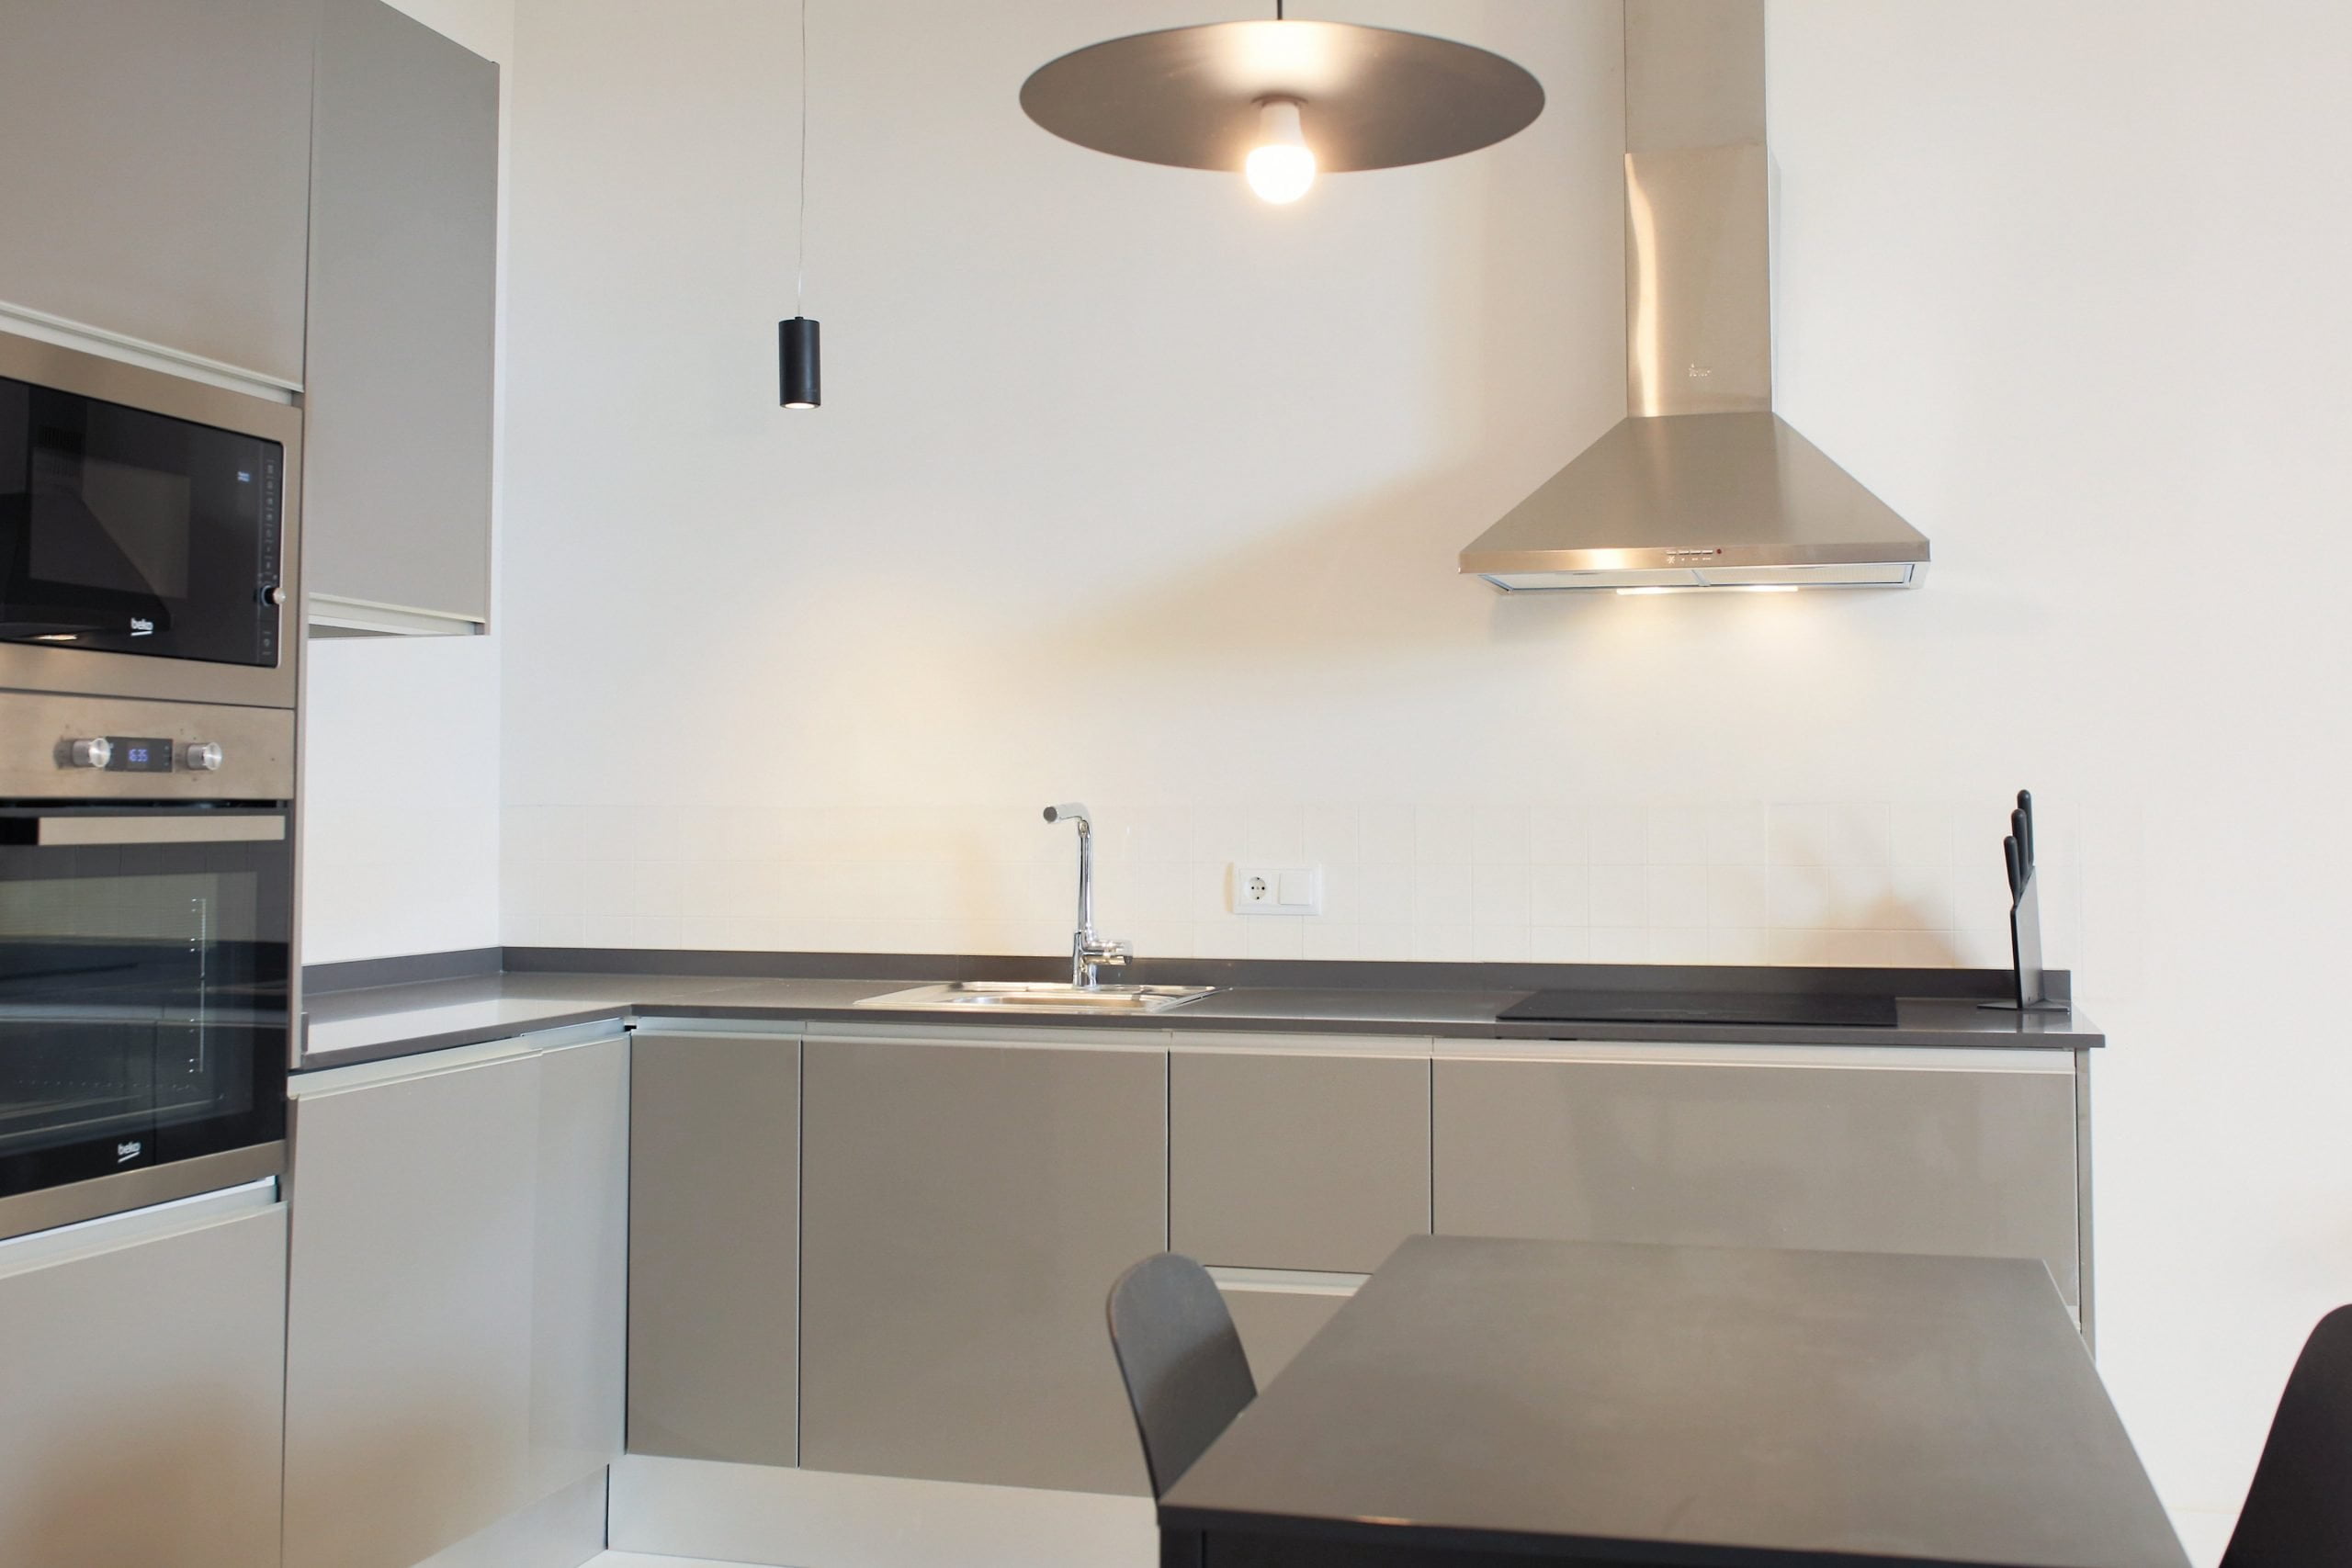 Tossal 4 – Boutique apartment for expats in Valencia